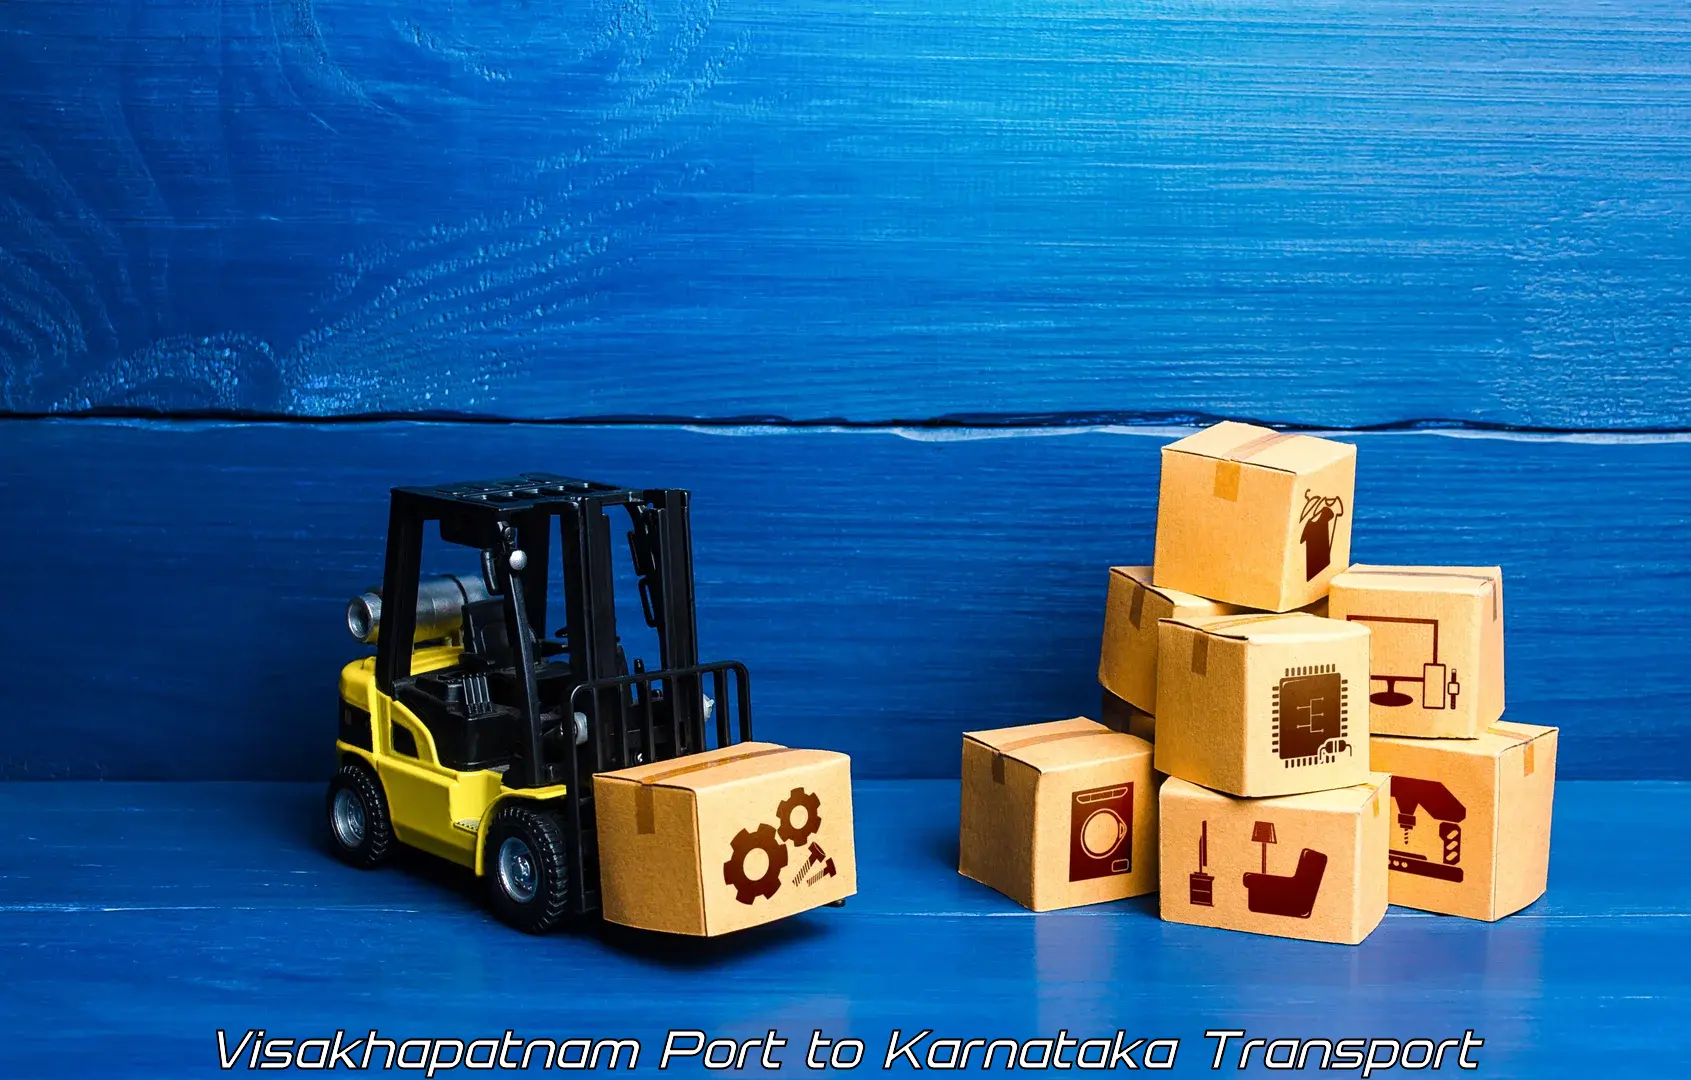 Transport bike from one state to another in Visakhapatnam Port to Yenepoya Mangalore